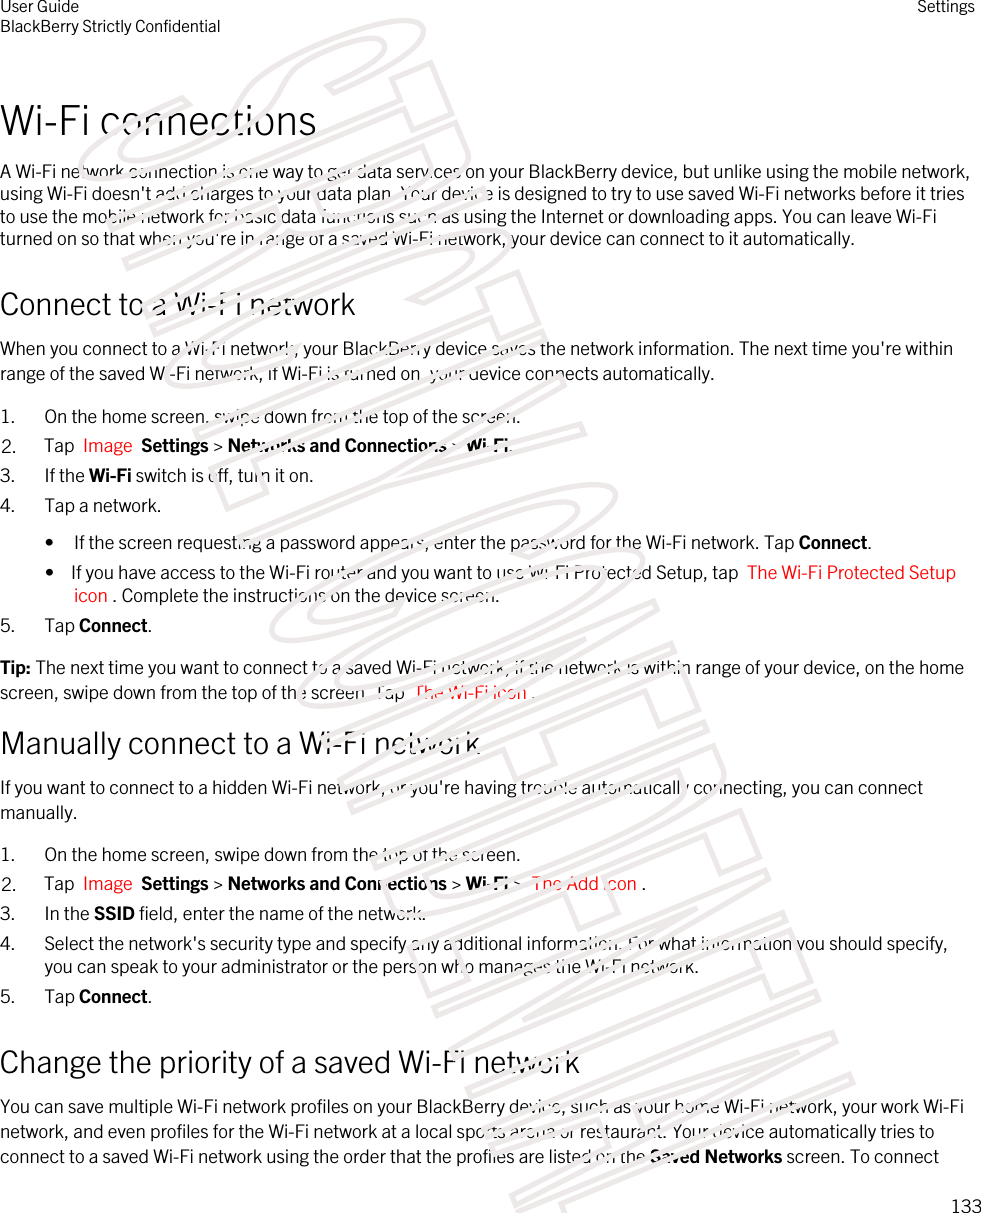 Wi-Fi connectionsA Wi-Fi network connection is one way to get data services on your BlackBerry device, but unlike using the mobile network, using Wi-Fi doesn&apos;t add charges to your data plan. Your device is designed to try to use saved Wi-Fi networks before it tries to use the mobile network for basic data functions such as using the Internet or downloading apps. You can leave Wi-Fi turned on so that when you&apos;re in range of a saved Wi-Fi network, your device can connect to it automatically.Connect to a Wi-Fi networkWhen you connect to a Wi-Fi network, your BlackBerry device saves the network information. The next time you&apos;re within range of the saved Wi-Fi network, if Wi-Fi is turned on, your device connects automatically.1. On the home screen, swipe down from the top of the screen.2. Tap  Image  Settings &gt; Networks and Connections &gt; Wi-Fi.3. If the Wi-Fi switch is off, turn it on.4. Tap a network.• If the screen requesting a password appears, enter the password for the Wi-Fi network. Tap Connect.•  If you have access to the Wi-Fi router and you want to use Wi-Fi Protected Setup, tap  The Wi-Fi Protected Setup icon . Complete the instructions on the device screen.5. Tap Connect.Tip: The next time you want to connect to a saved Wi-Fi network, if the network is within range of your device, on the home screen, swipe down from the top of the screen. Tap  The Wi-Fi icon .Manually connect to a Wi-Fi networkIf you want to connect to a hidden Wi-Fi network, or you&apos;re having trouble automatically connecting, you can connect manually.1. On the home screen, swipe down from the top of the screen.2. Tap  Image  Settings &gt; Networks and Connections &gt; Wi-Fi &gt;  The Add icon .3. In the SSID field, enter the name of the network.4. Select the network&apos;s security type and specify any additional information. For what information you should specify, you can speak to your administrator or the person who manages the Wi-Fi network.5. Tap Connect.Change the priority of a saved Wi-Fi networkYou can save multiple Wi-Fi network profiles on your BlackBerry device, such as your home Wi-Fi network, your work Wi-Fi network, and even profiles for the Wi-Fi network at a local sports arena or restaurant. Your device automatically tries to connect to a saved Wi-Fi network using the order that the profiles are listed on the Saved Networks screen. To connect User GuideBlackBerry Strictly ConfidentialSettings133STRICTLY CONFIDENTIAL